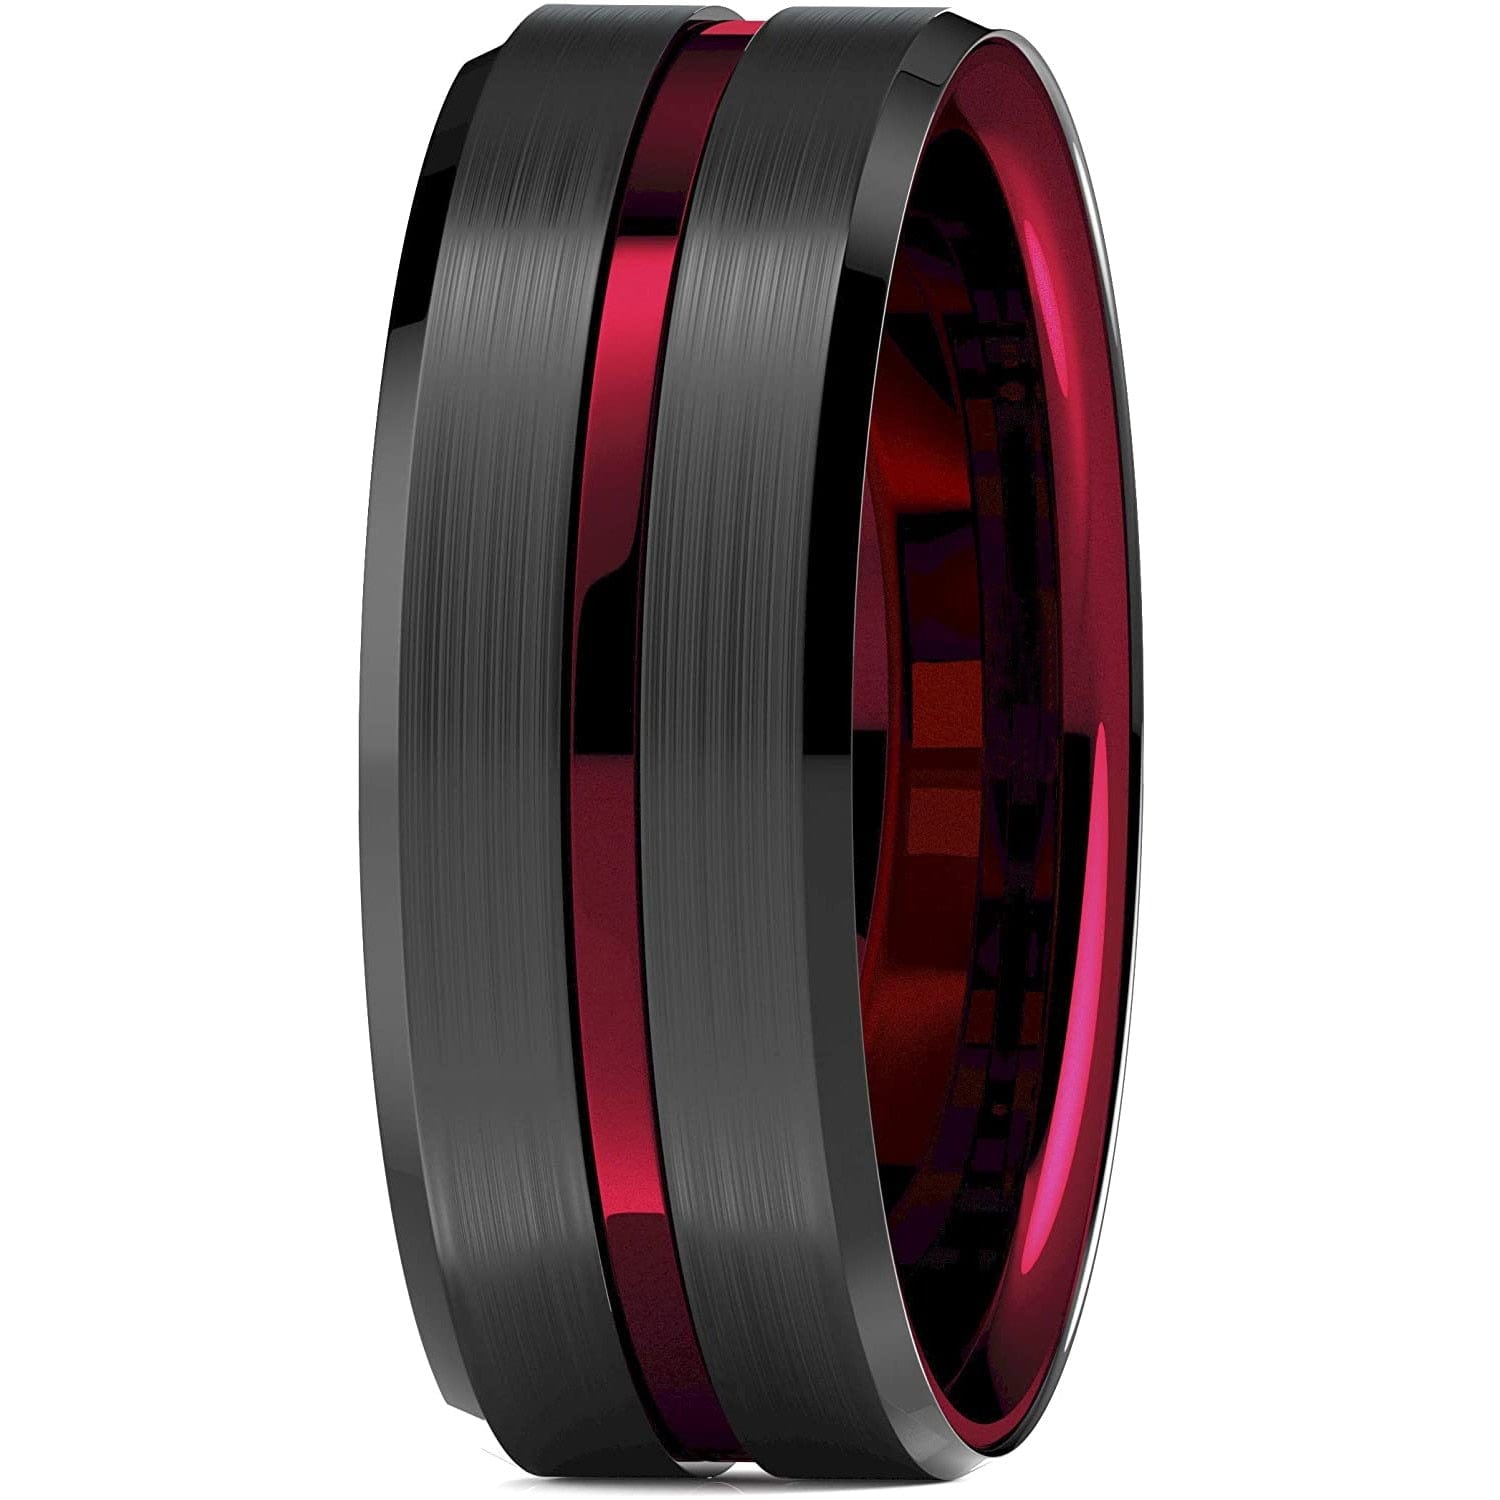 VVS Jewelry hip hop jewelry 8MM Tungsten Carbide Ring  Matte Finish Beveled Polished Edge Comfort Fit